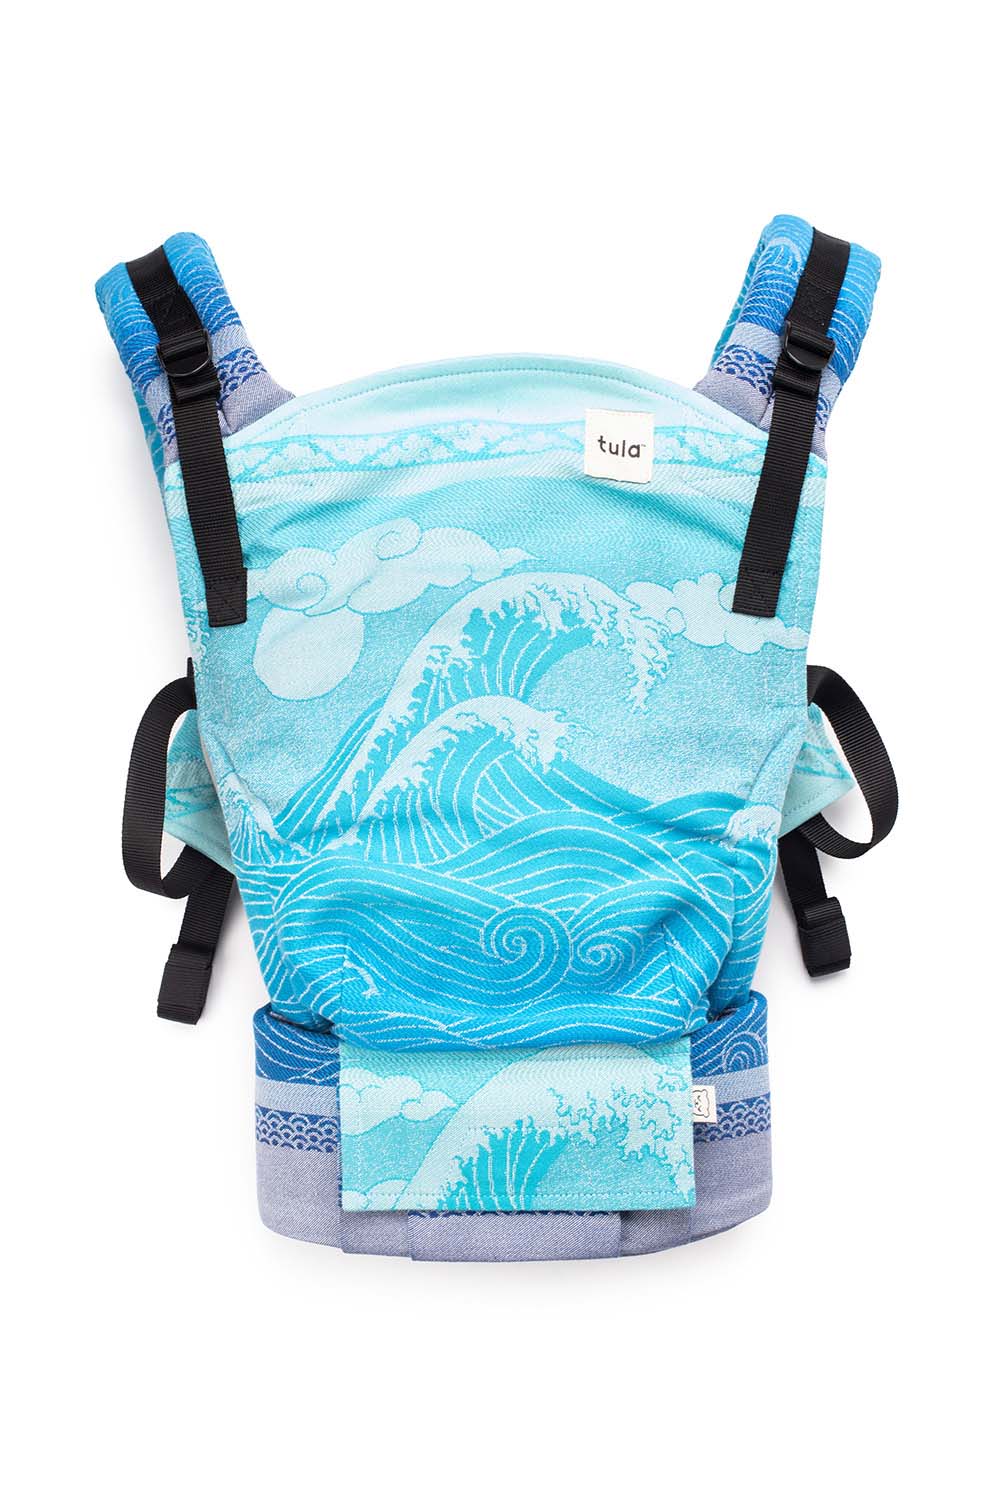 Okinami Ocean - Signature Free to Grow Baby Carrier